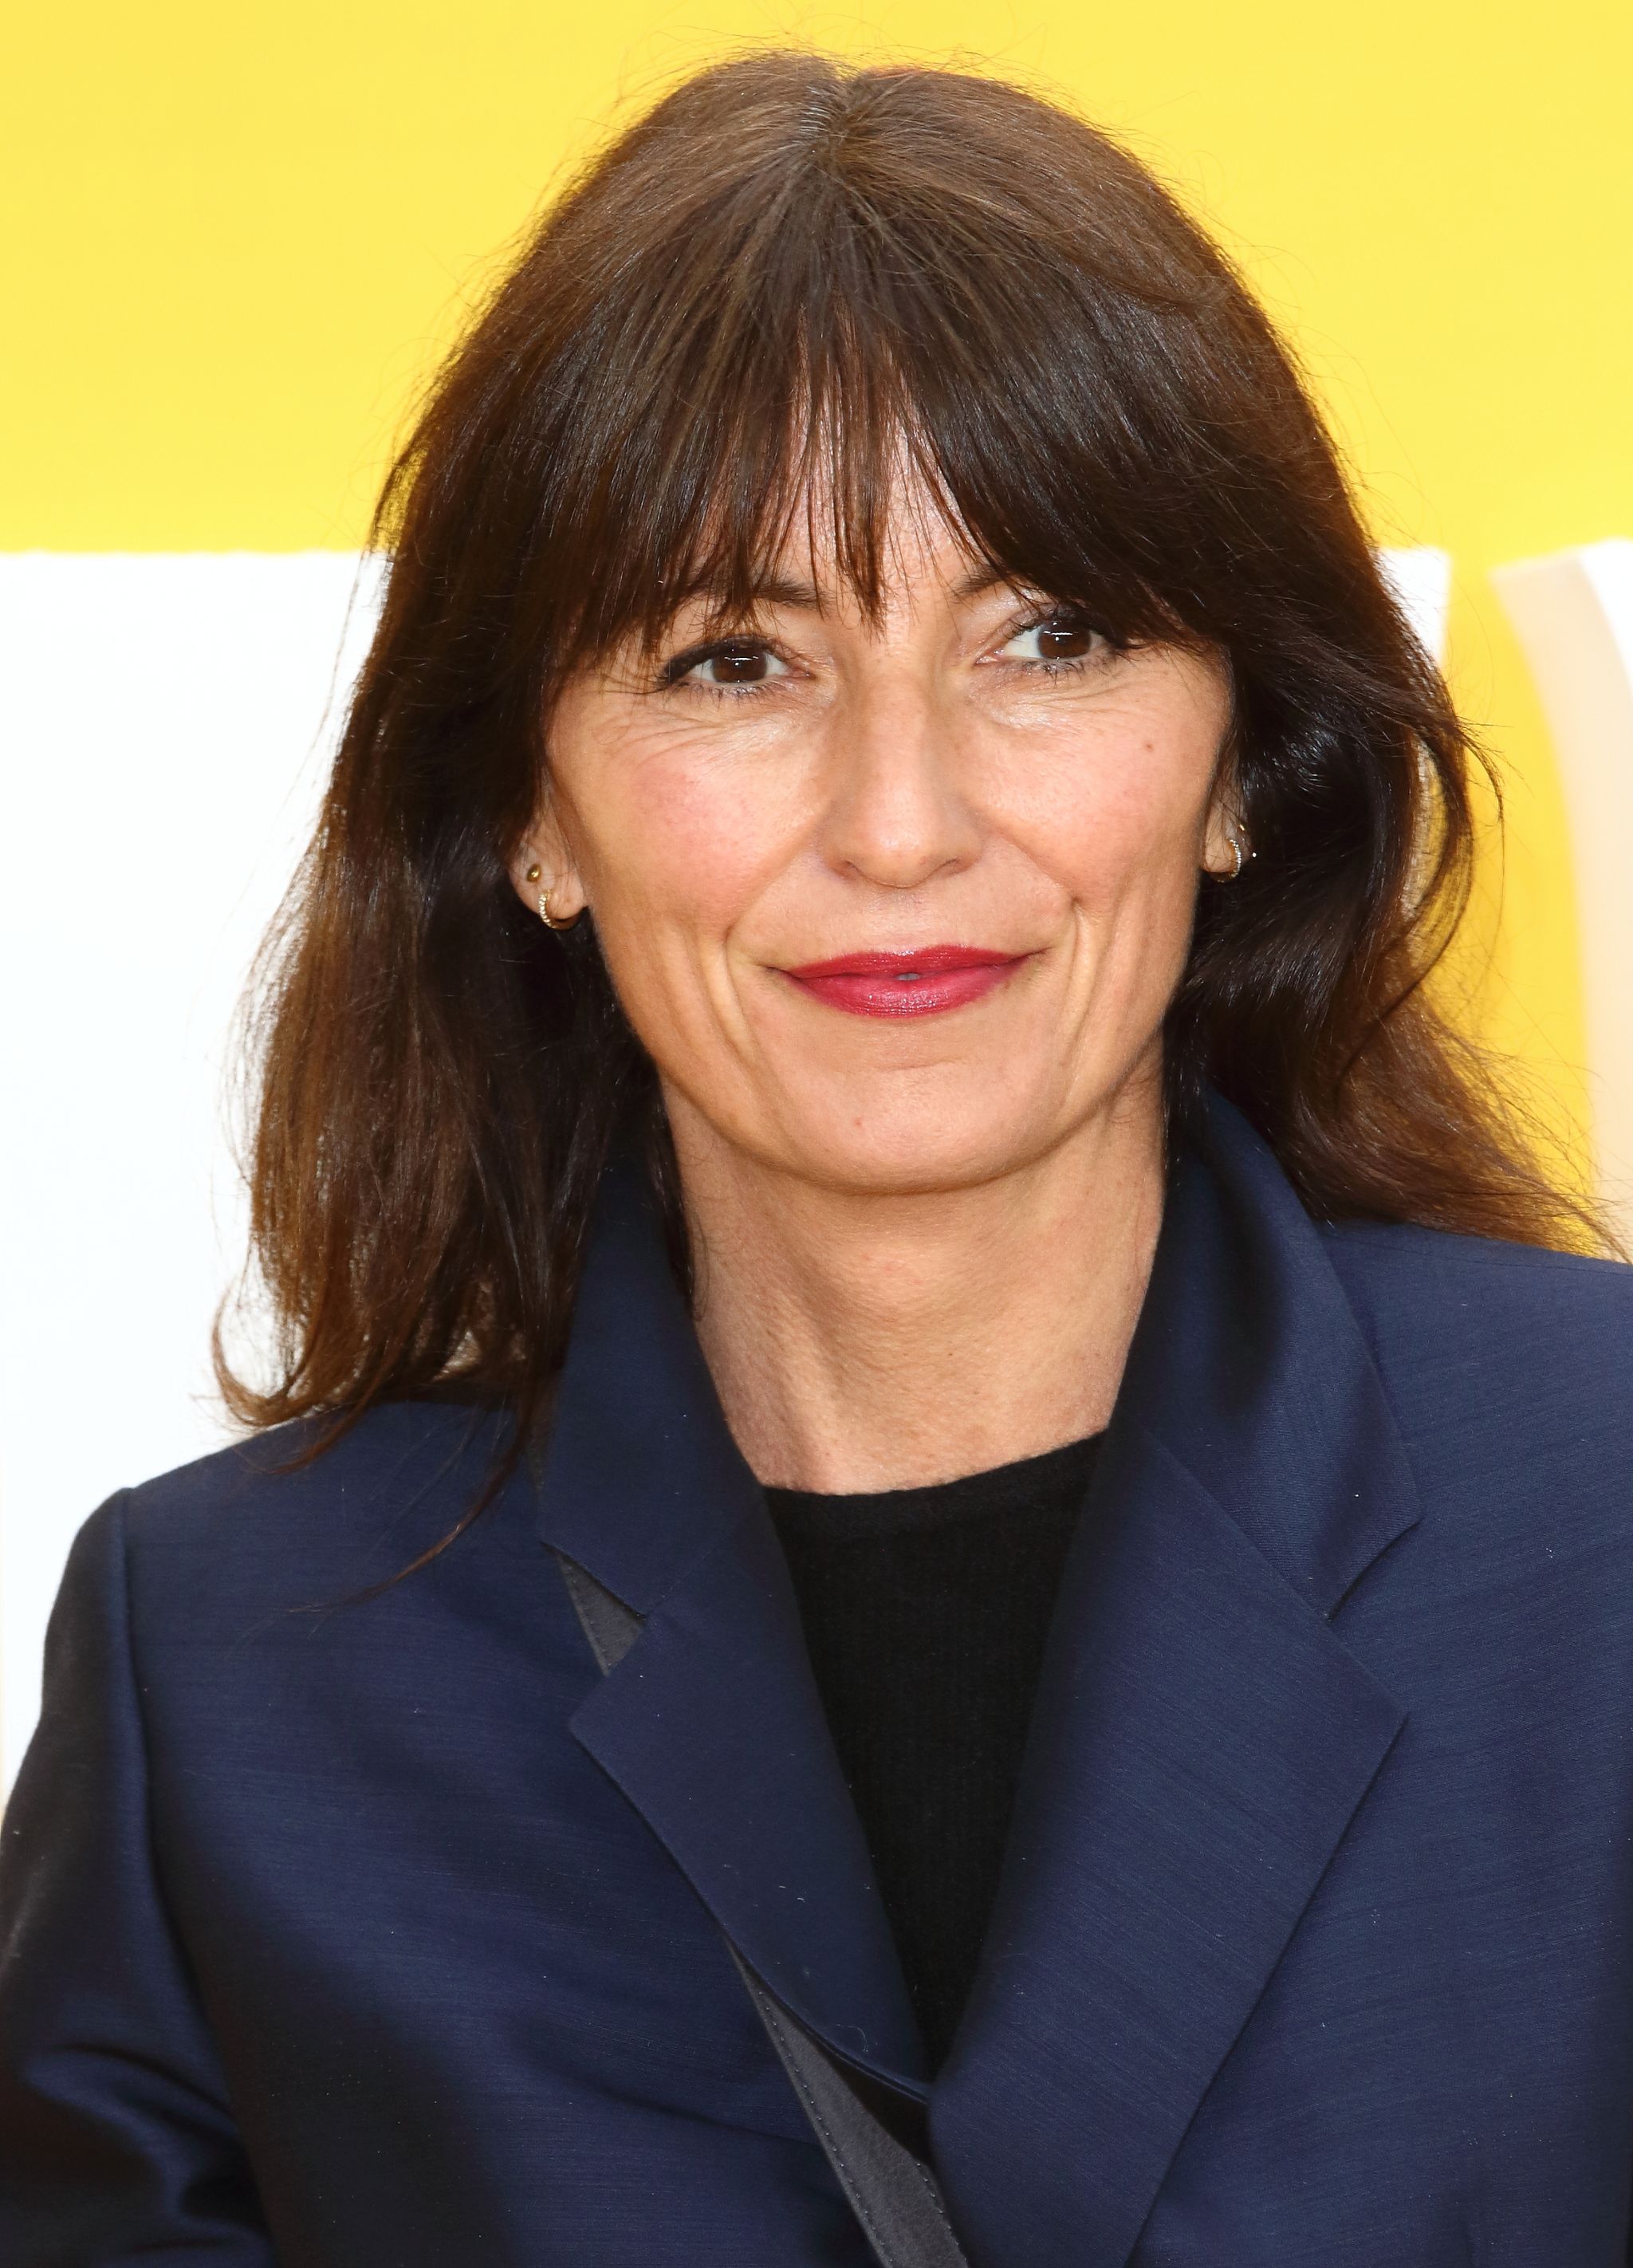 Davina McCall Swears by a Pre-Workout Coffee for Better Results